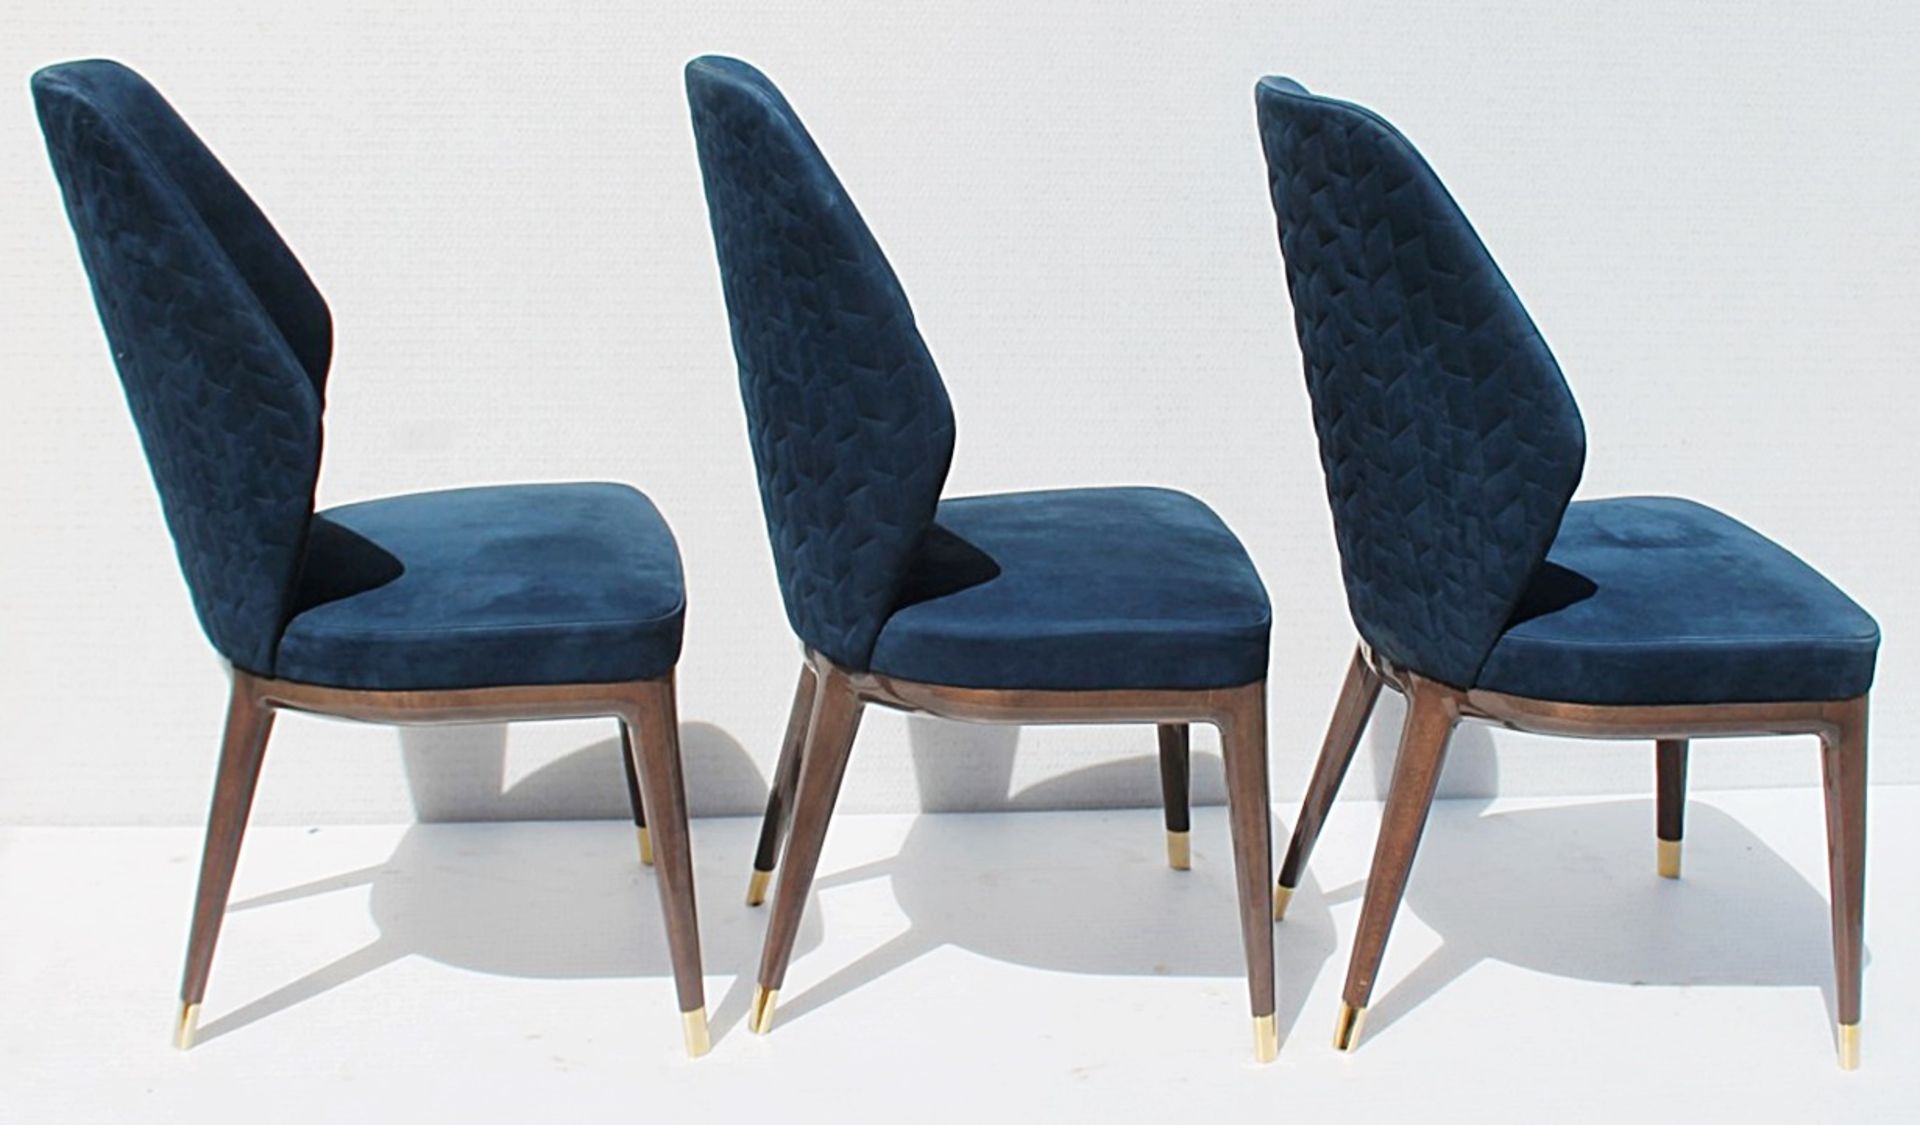 6 x GIORGIO COLLECTION 'Charisma' Luxury Dining Side Chairs In Blue - Total Original Price £15,330 - Image 9 of 17